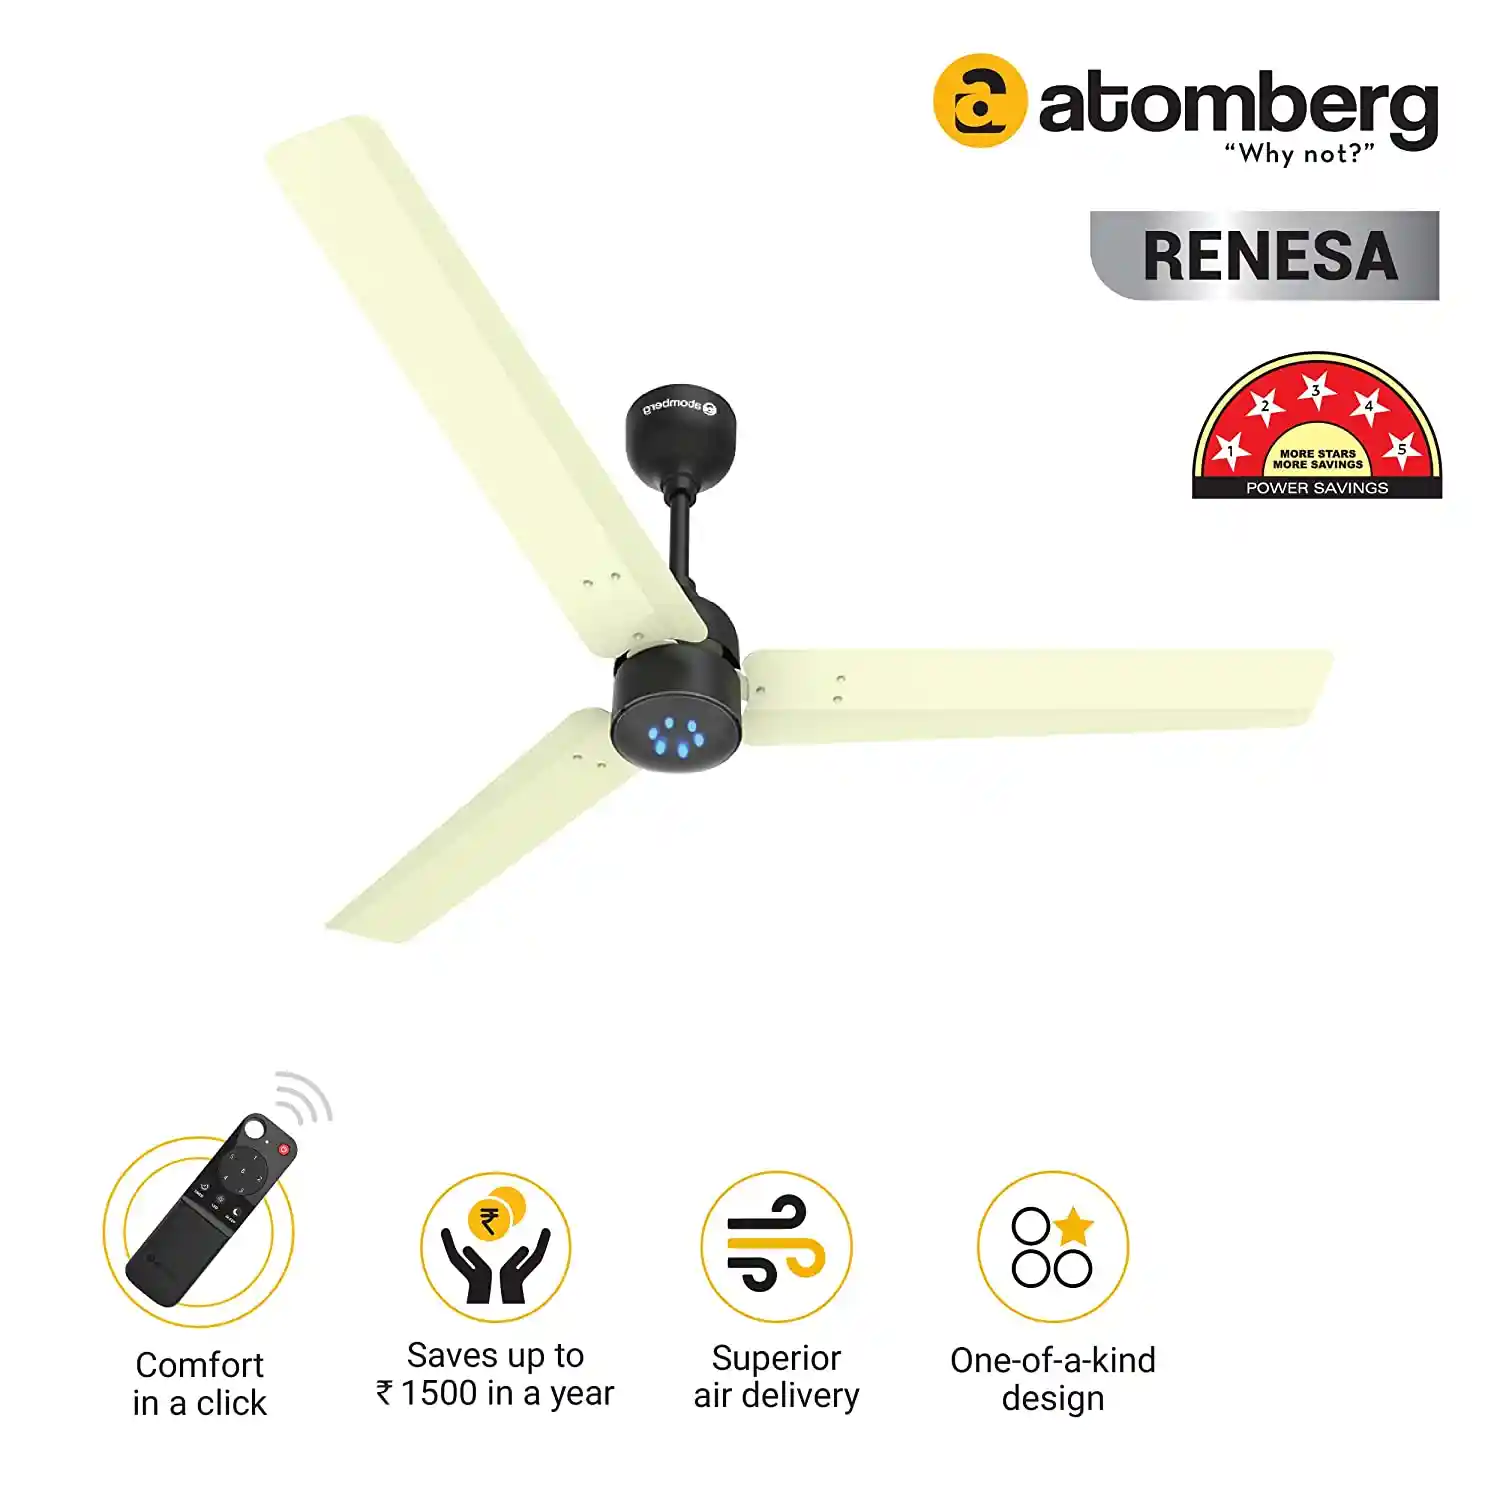 atomberg Renesa 1200mm BLDC Motor 5 Star Rated silent ceiling fan in india